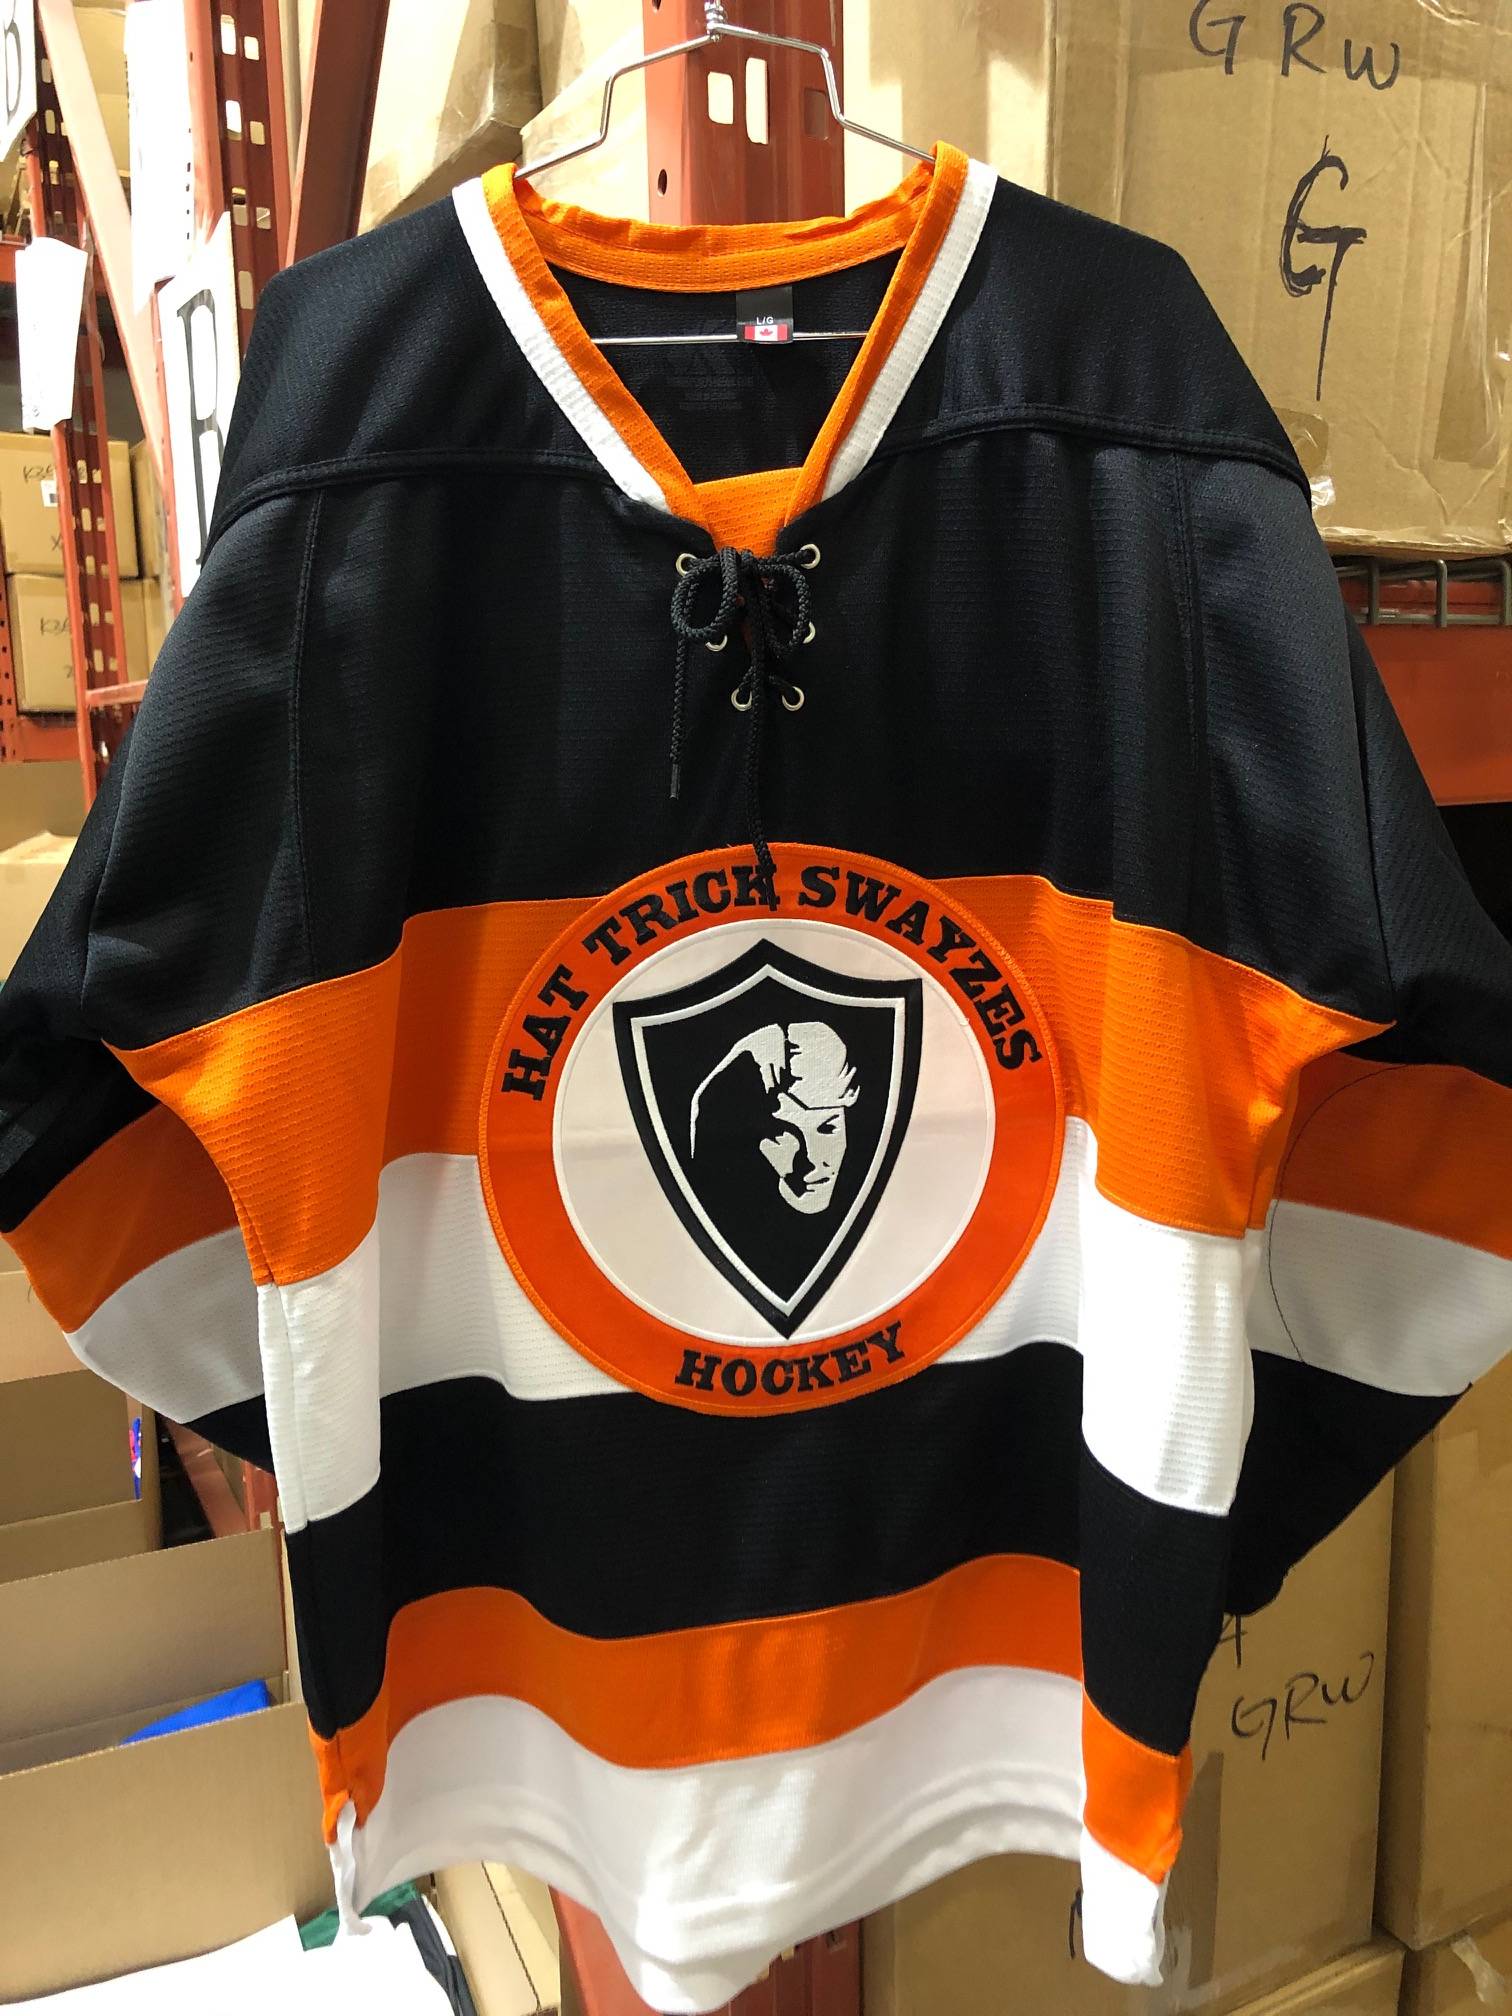 New jerseys for my mens ice hockey league. The Rippers : r